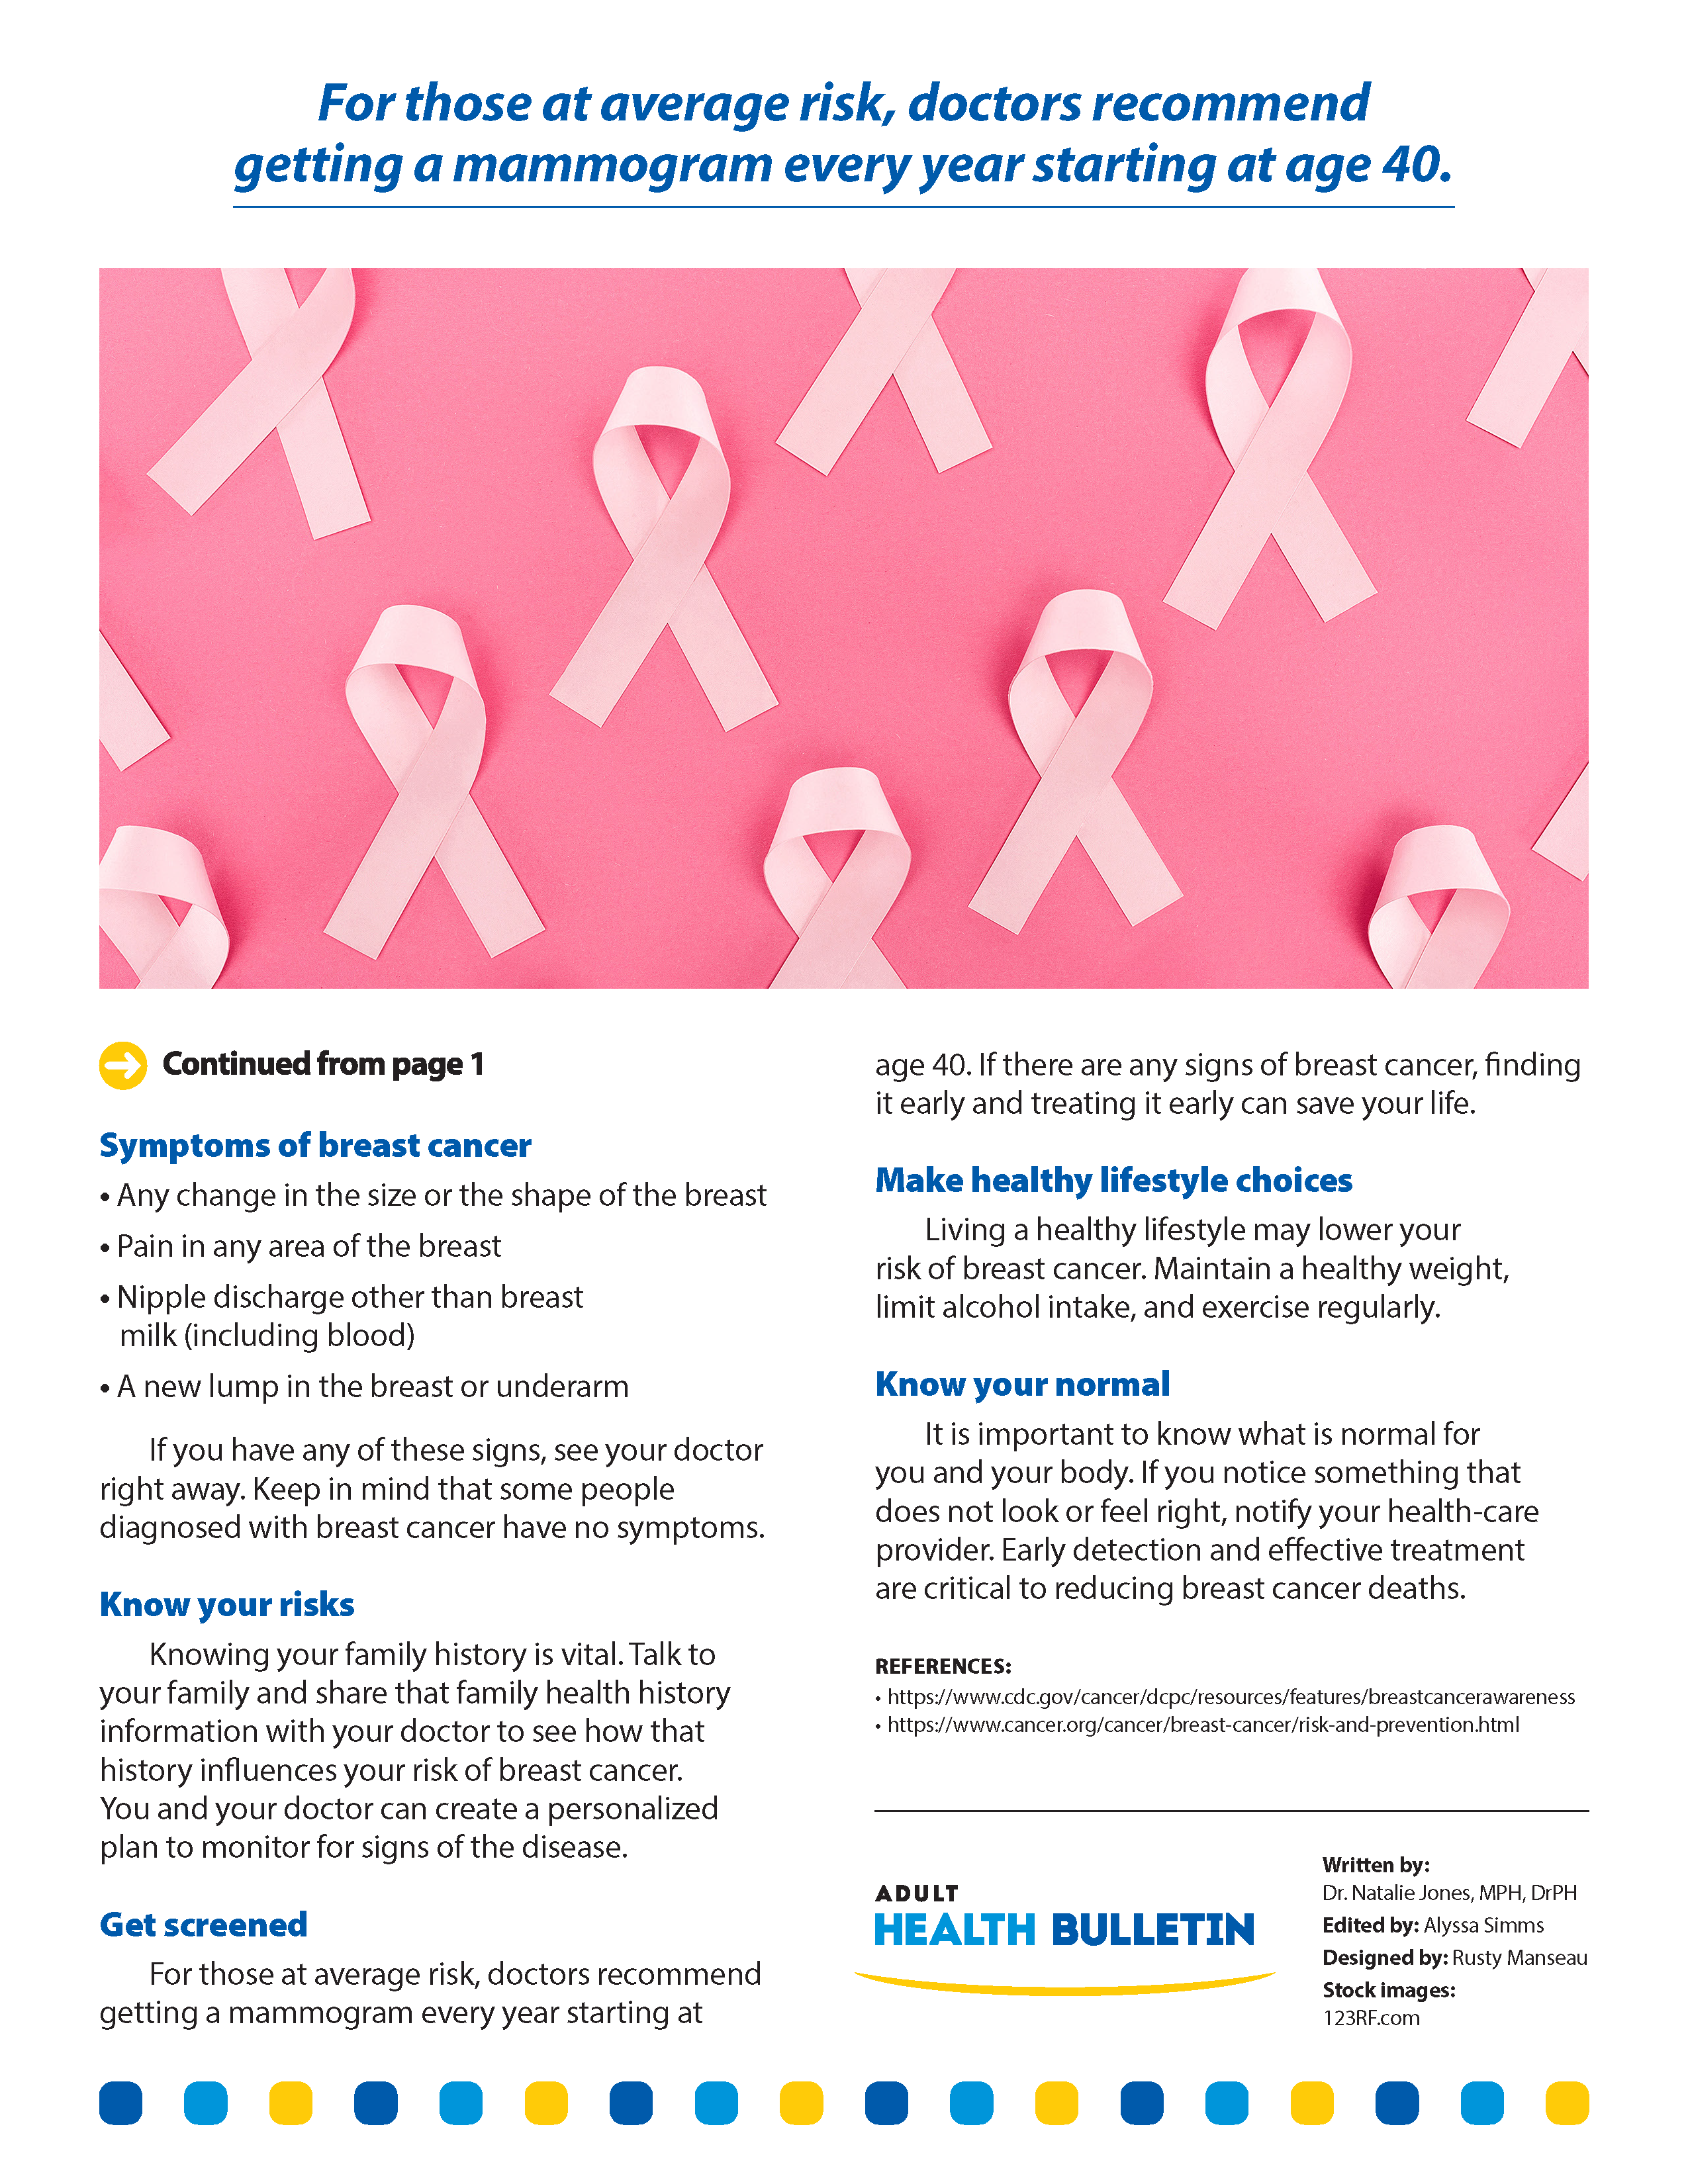 Adult Health Bulletin - Breast Cancer Awareness page 2